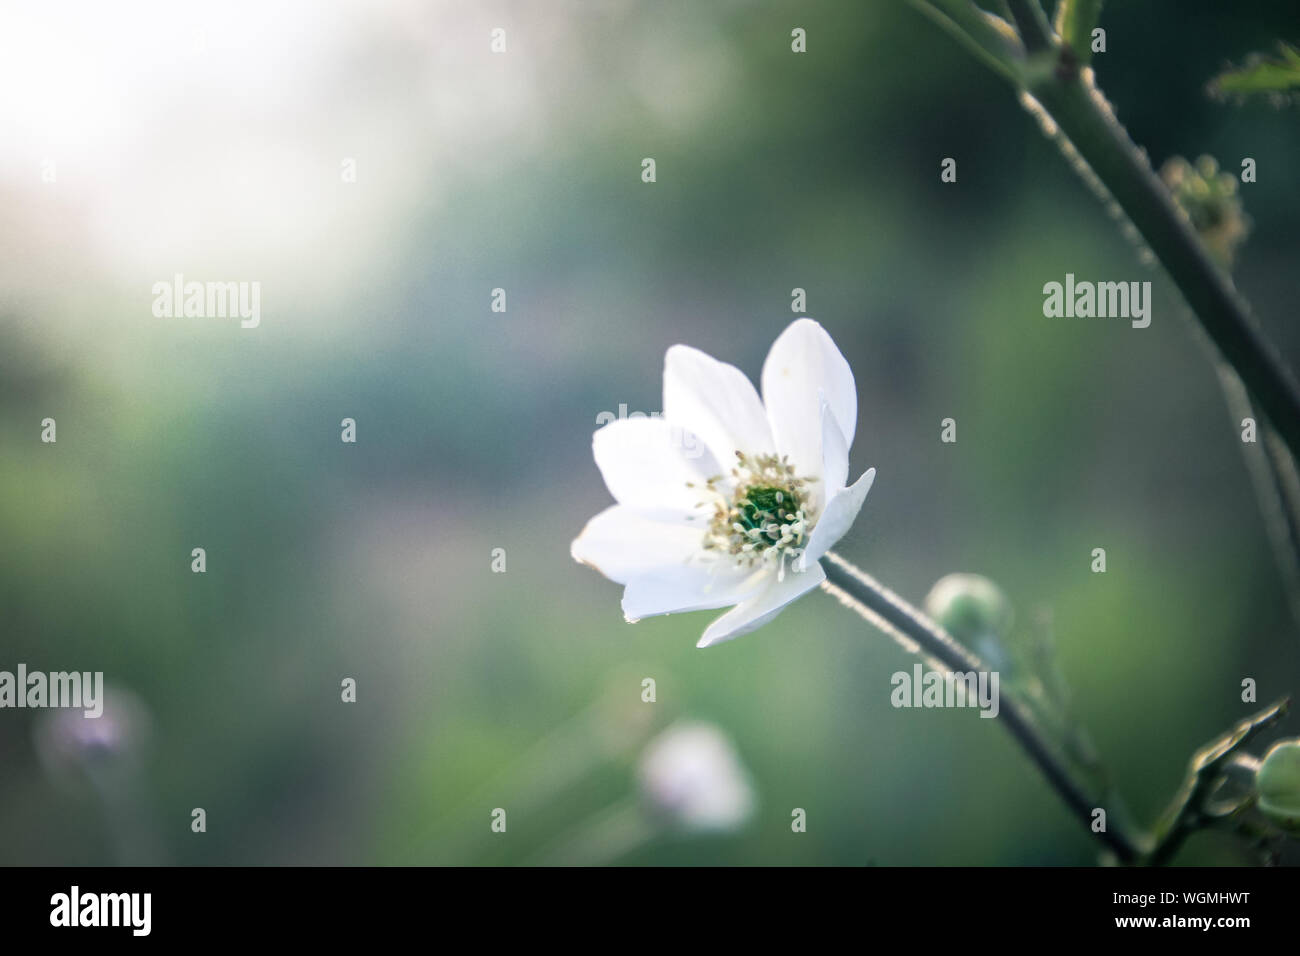 Close-up Of White Flower Growing Outdoors Stock Photo